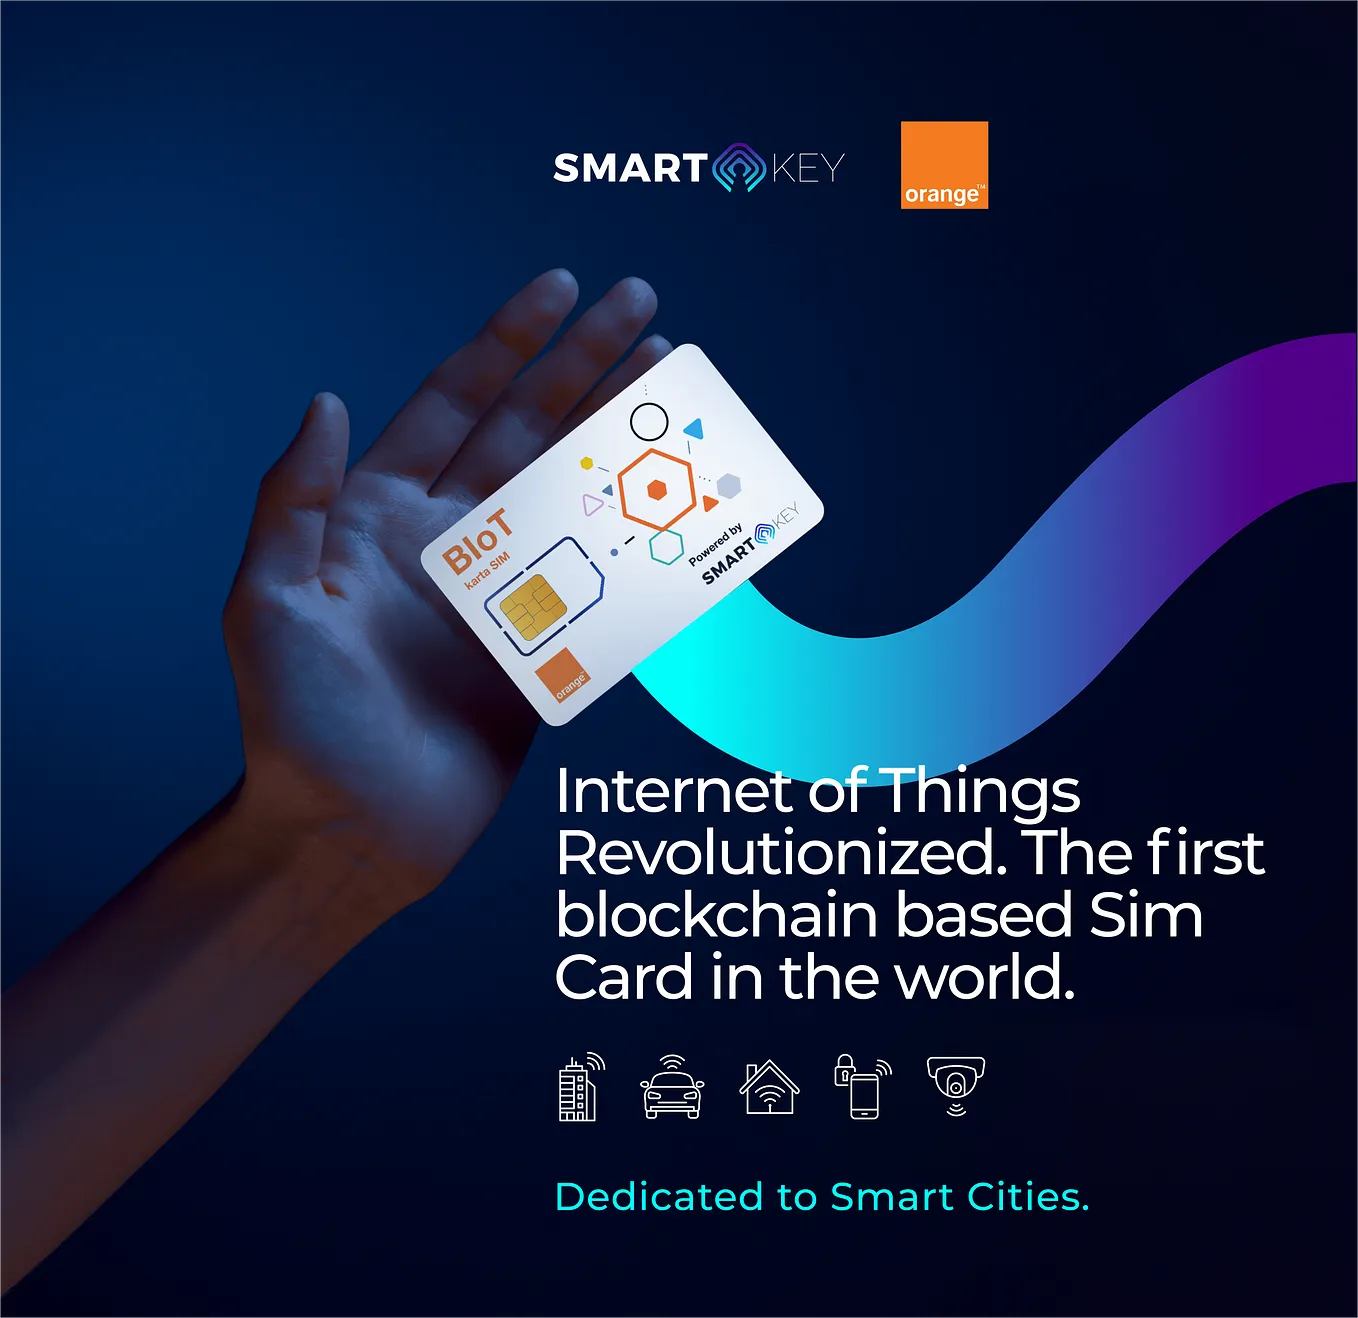 SmartKey X Orange: the world’s first blockchain-of-things SIM for smart cities.